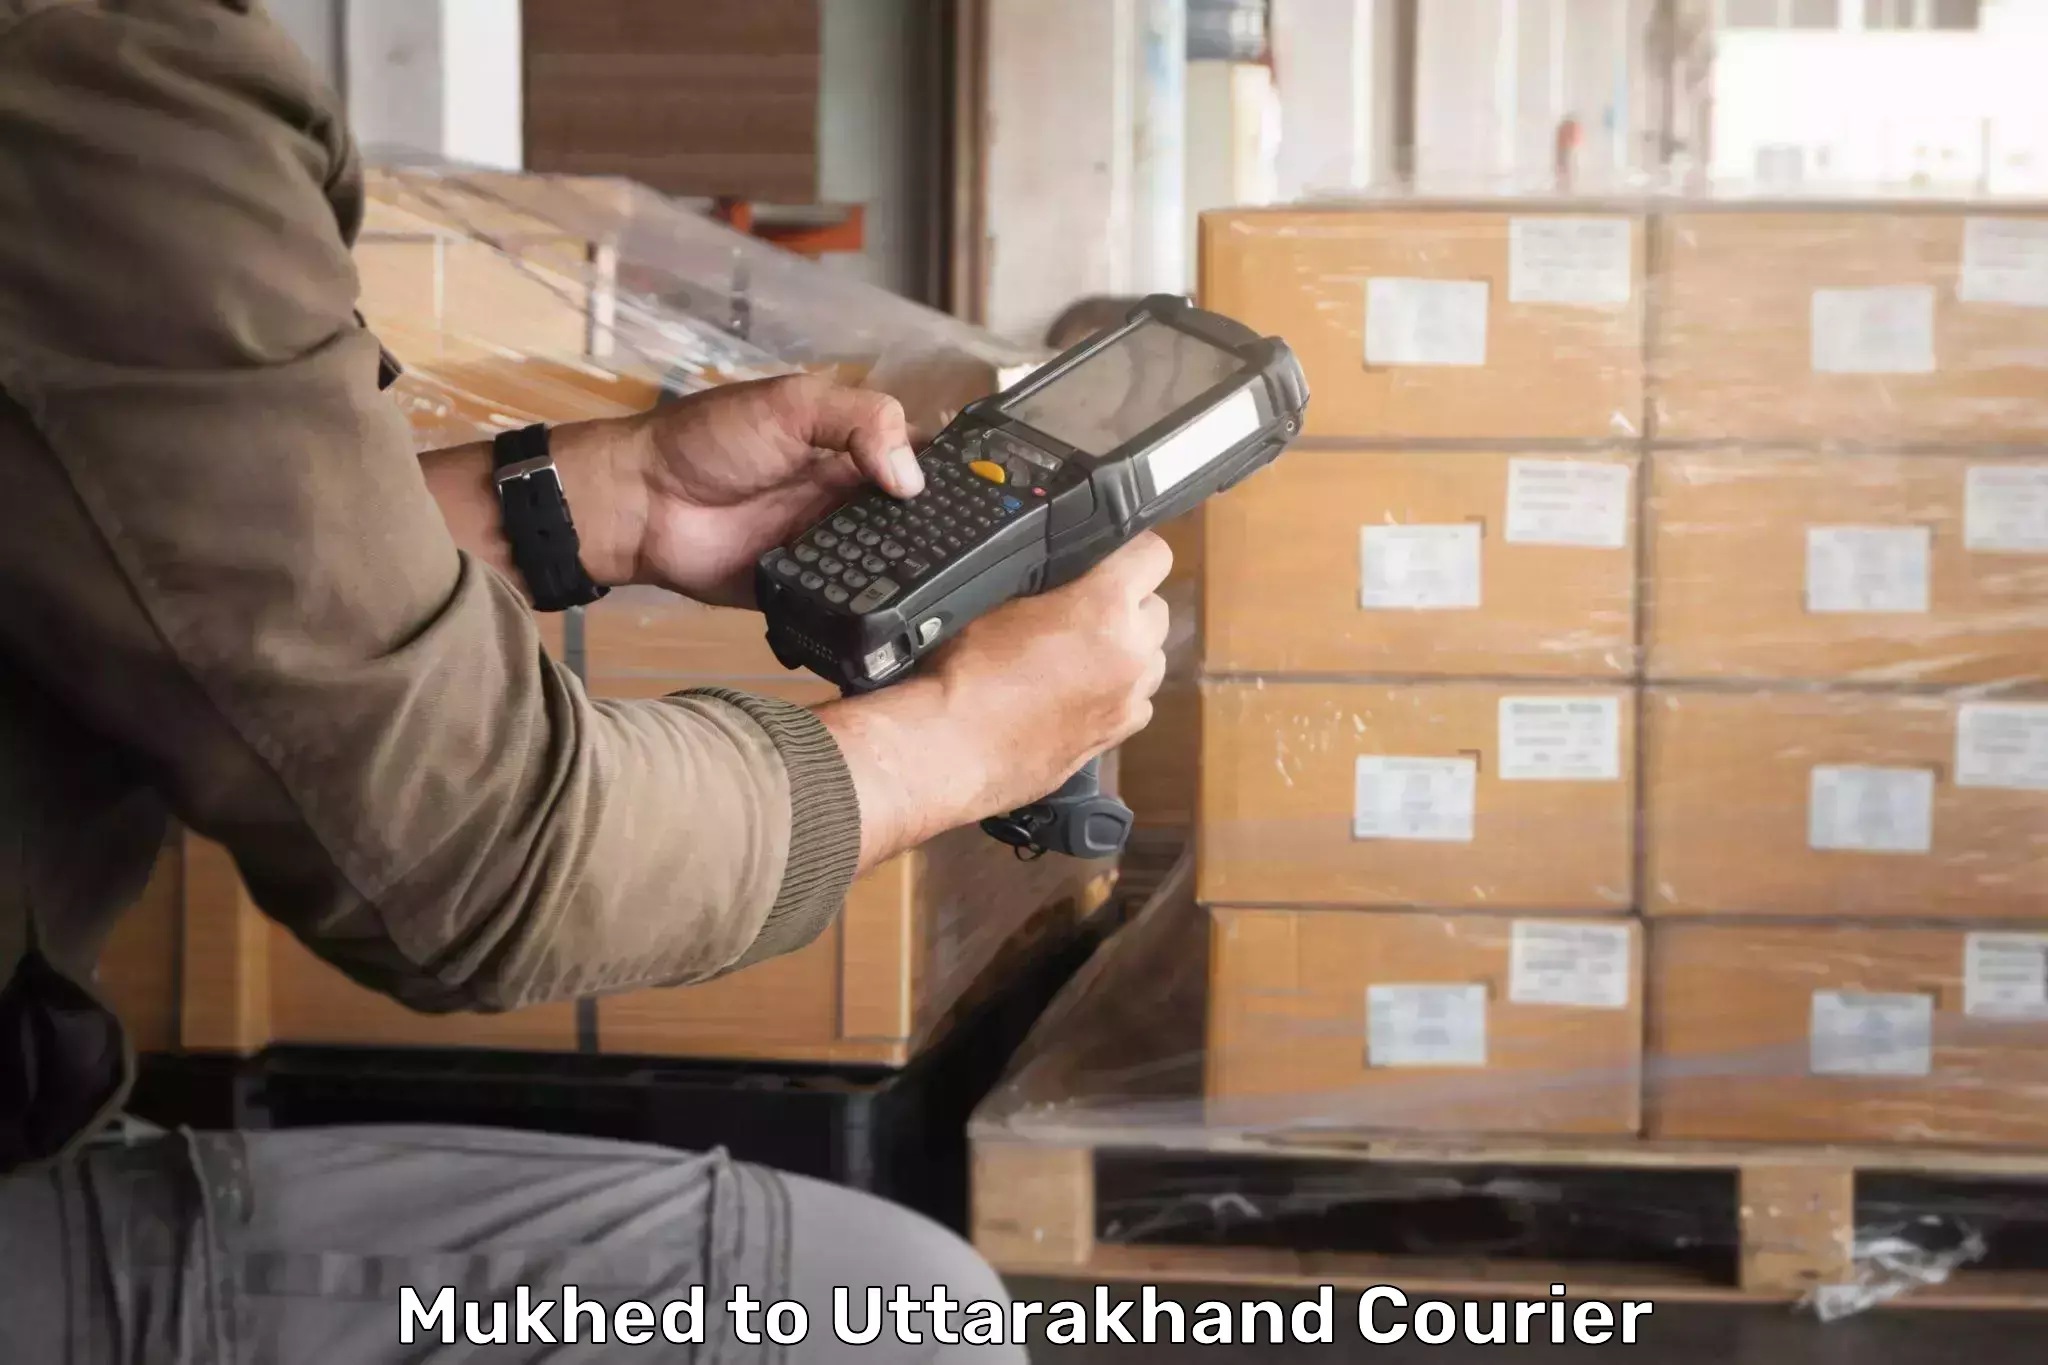 International courier networks Mukhed to Pithoragarh